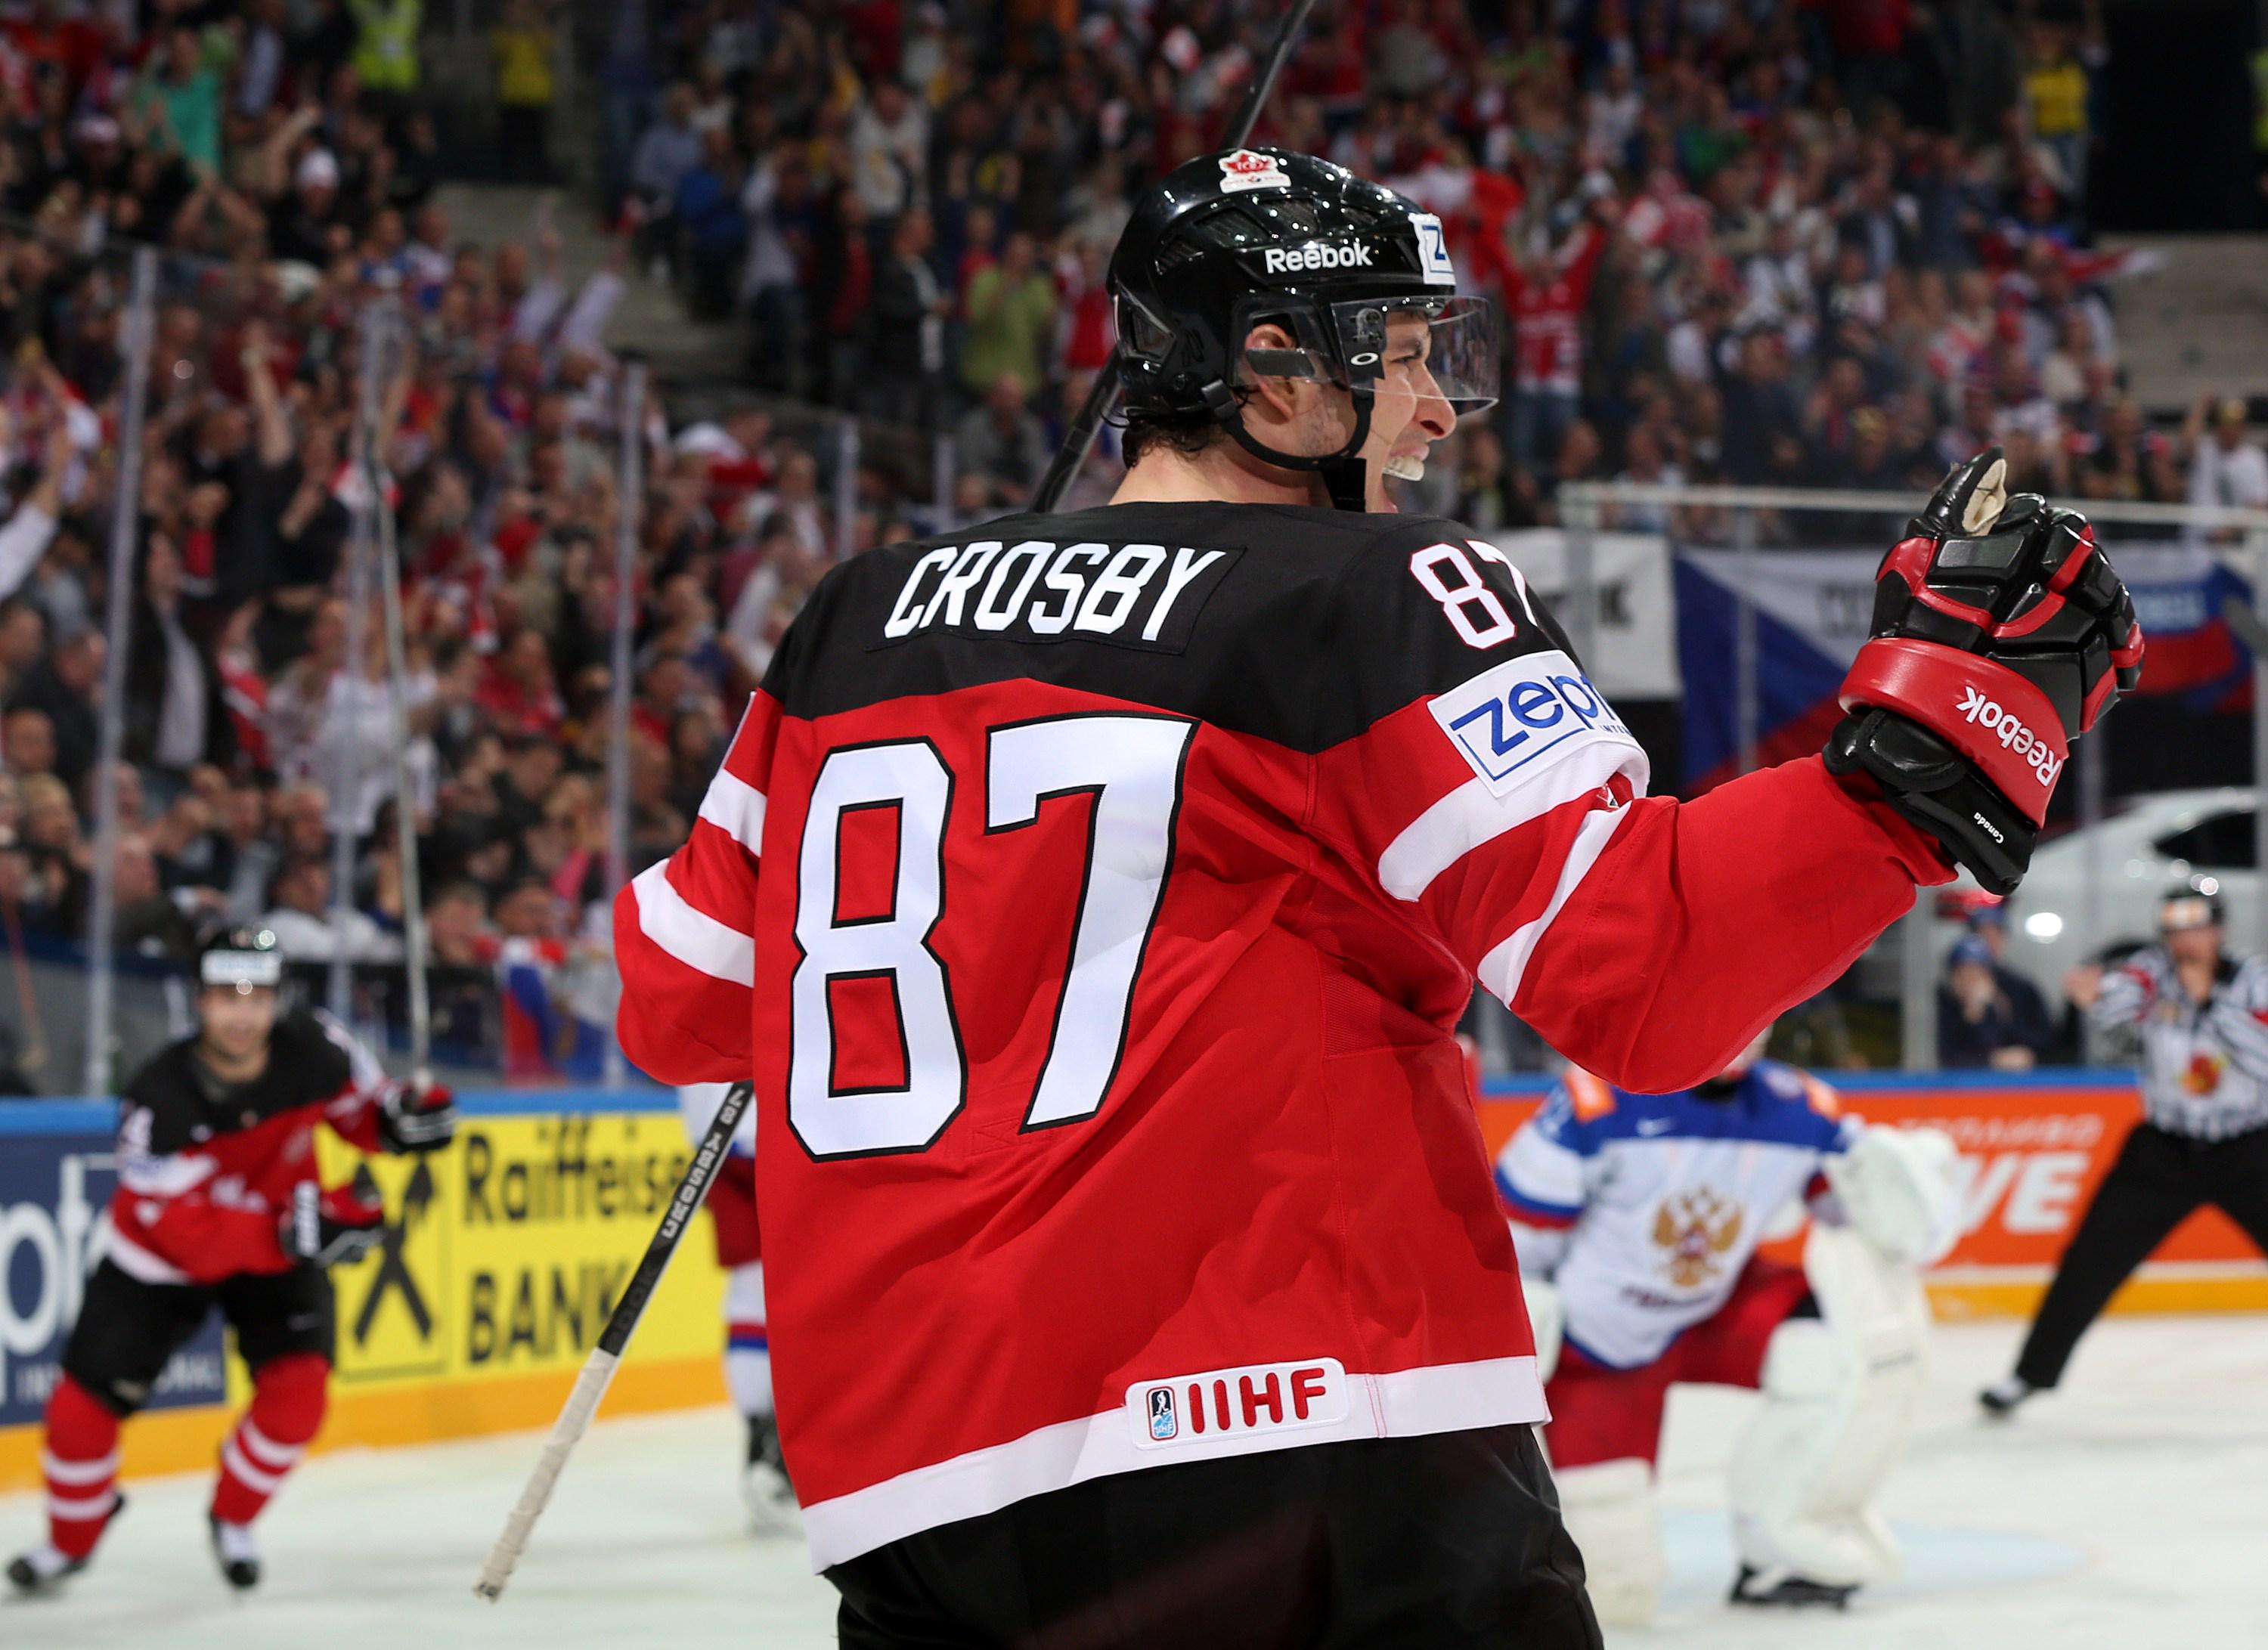 Canada's win puts Sidney Crosby in the exclusive Triple Gold Club